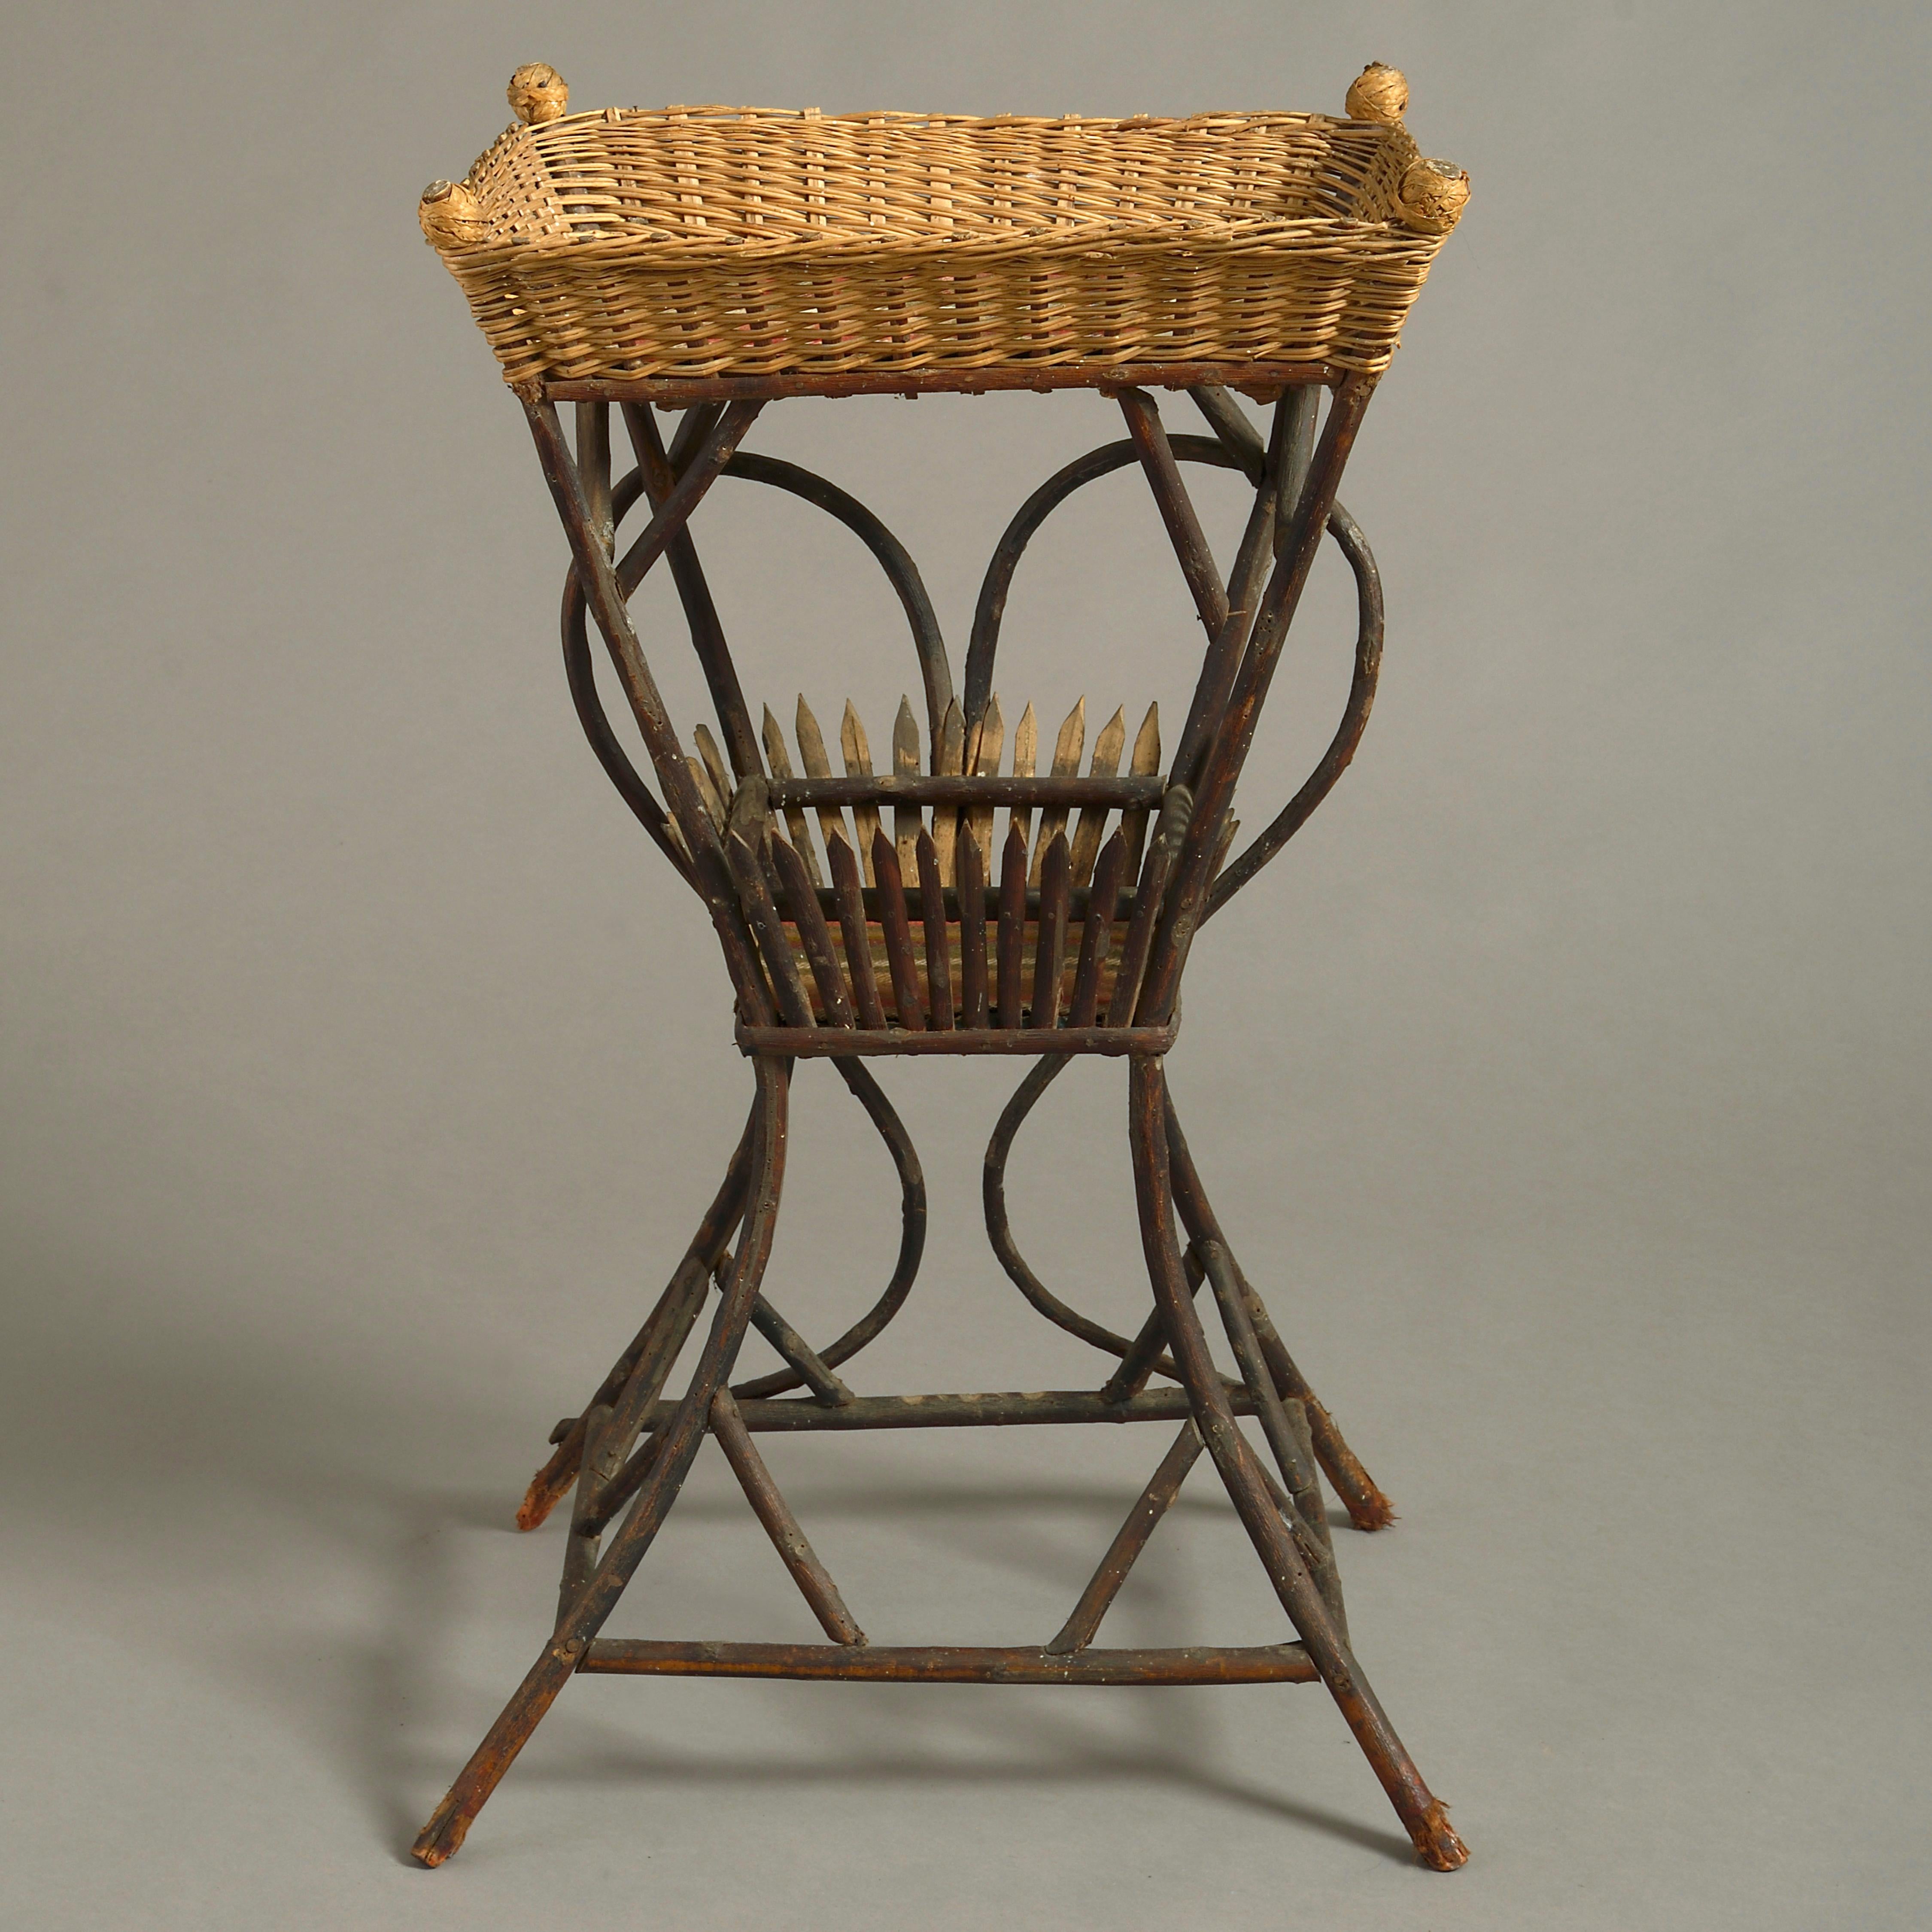 An unusual 19th century occasional table, having a wicker work tray top, with tartan lining, set upon a canework stand.